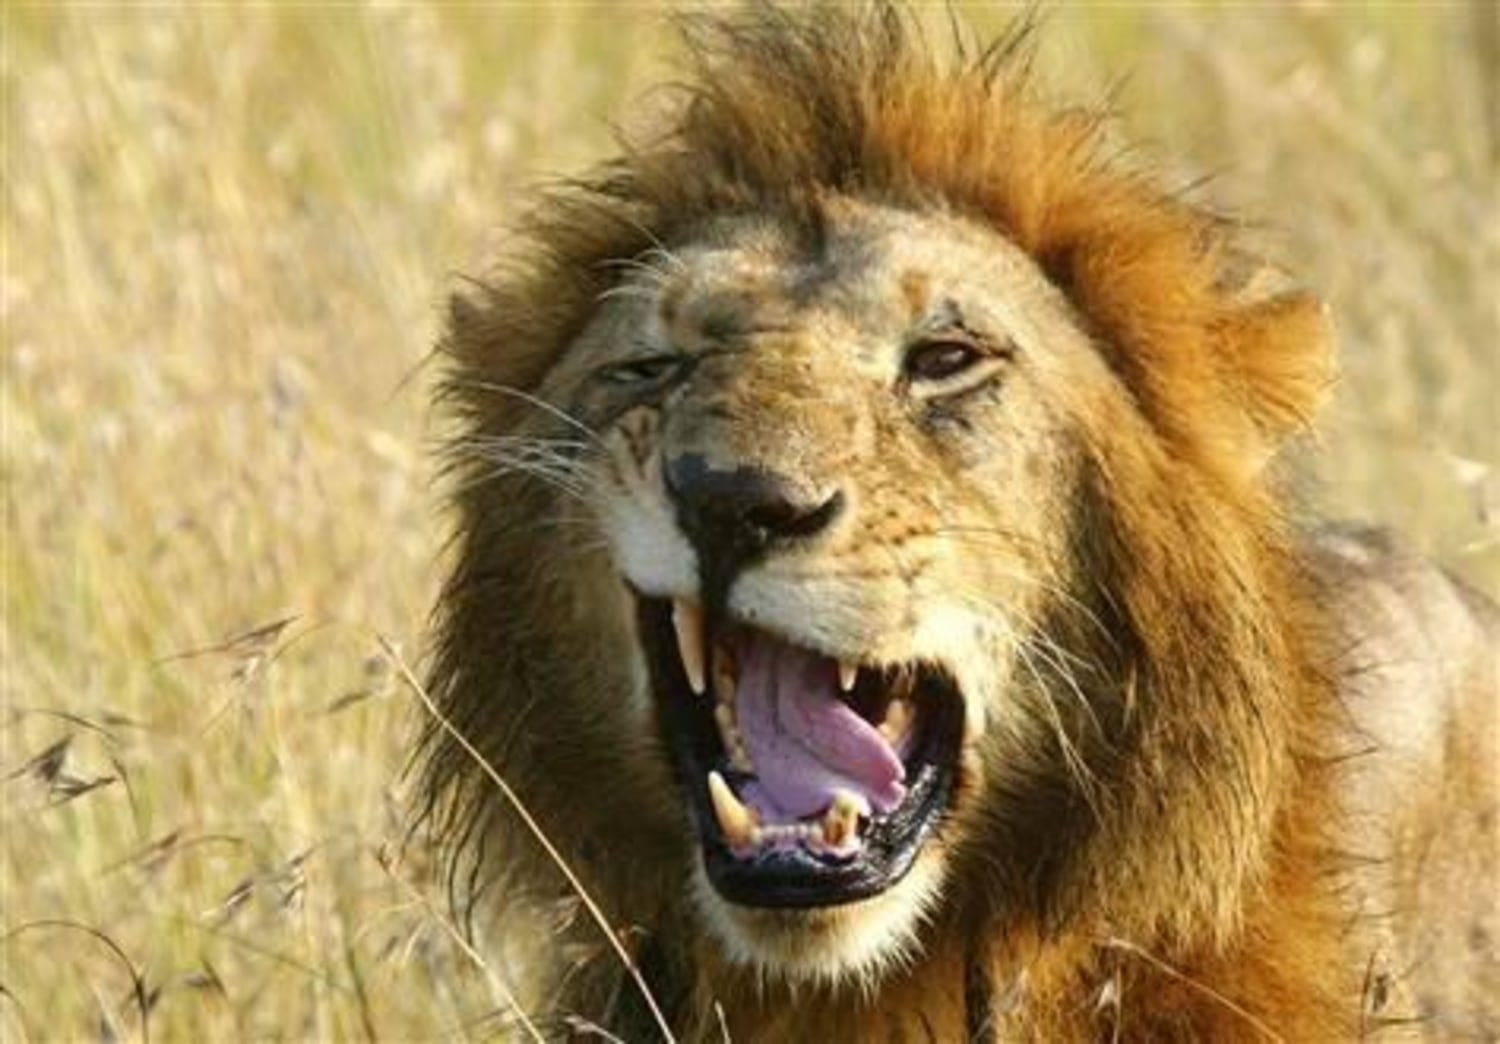 Male lions do help with the hunting after all